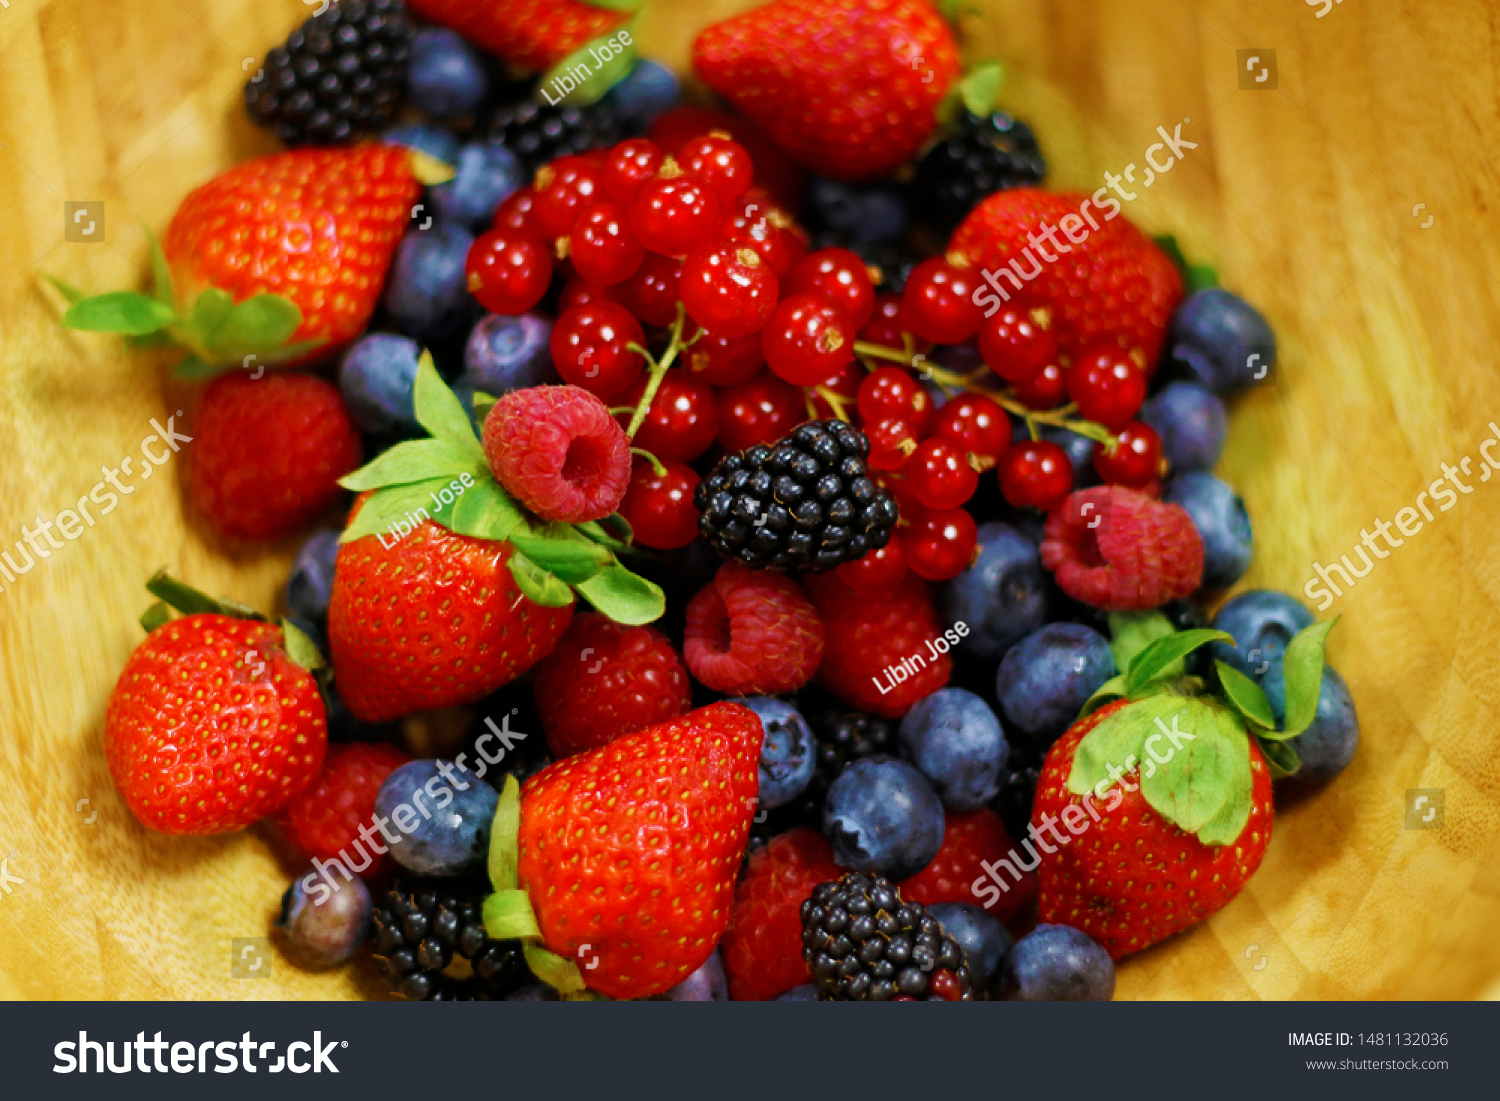 fresh berries fruit in wooden bowl includes strawberry, raspberry,blue berry,black berry etc. #1481132036